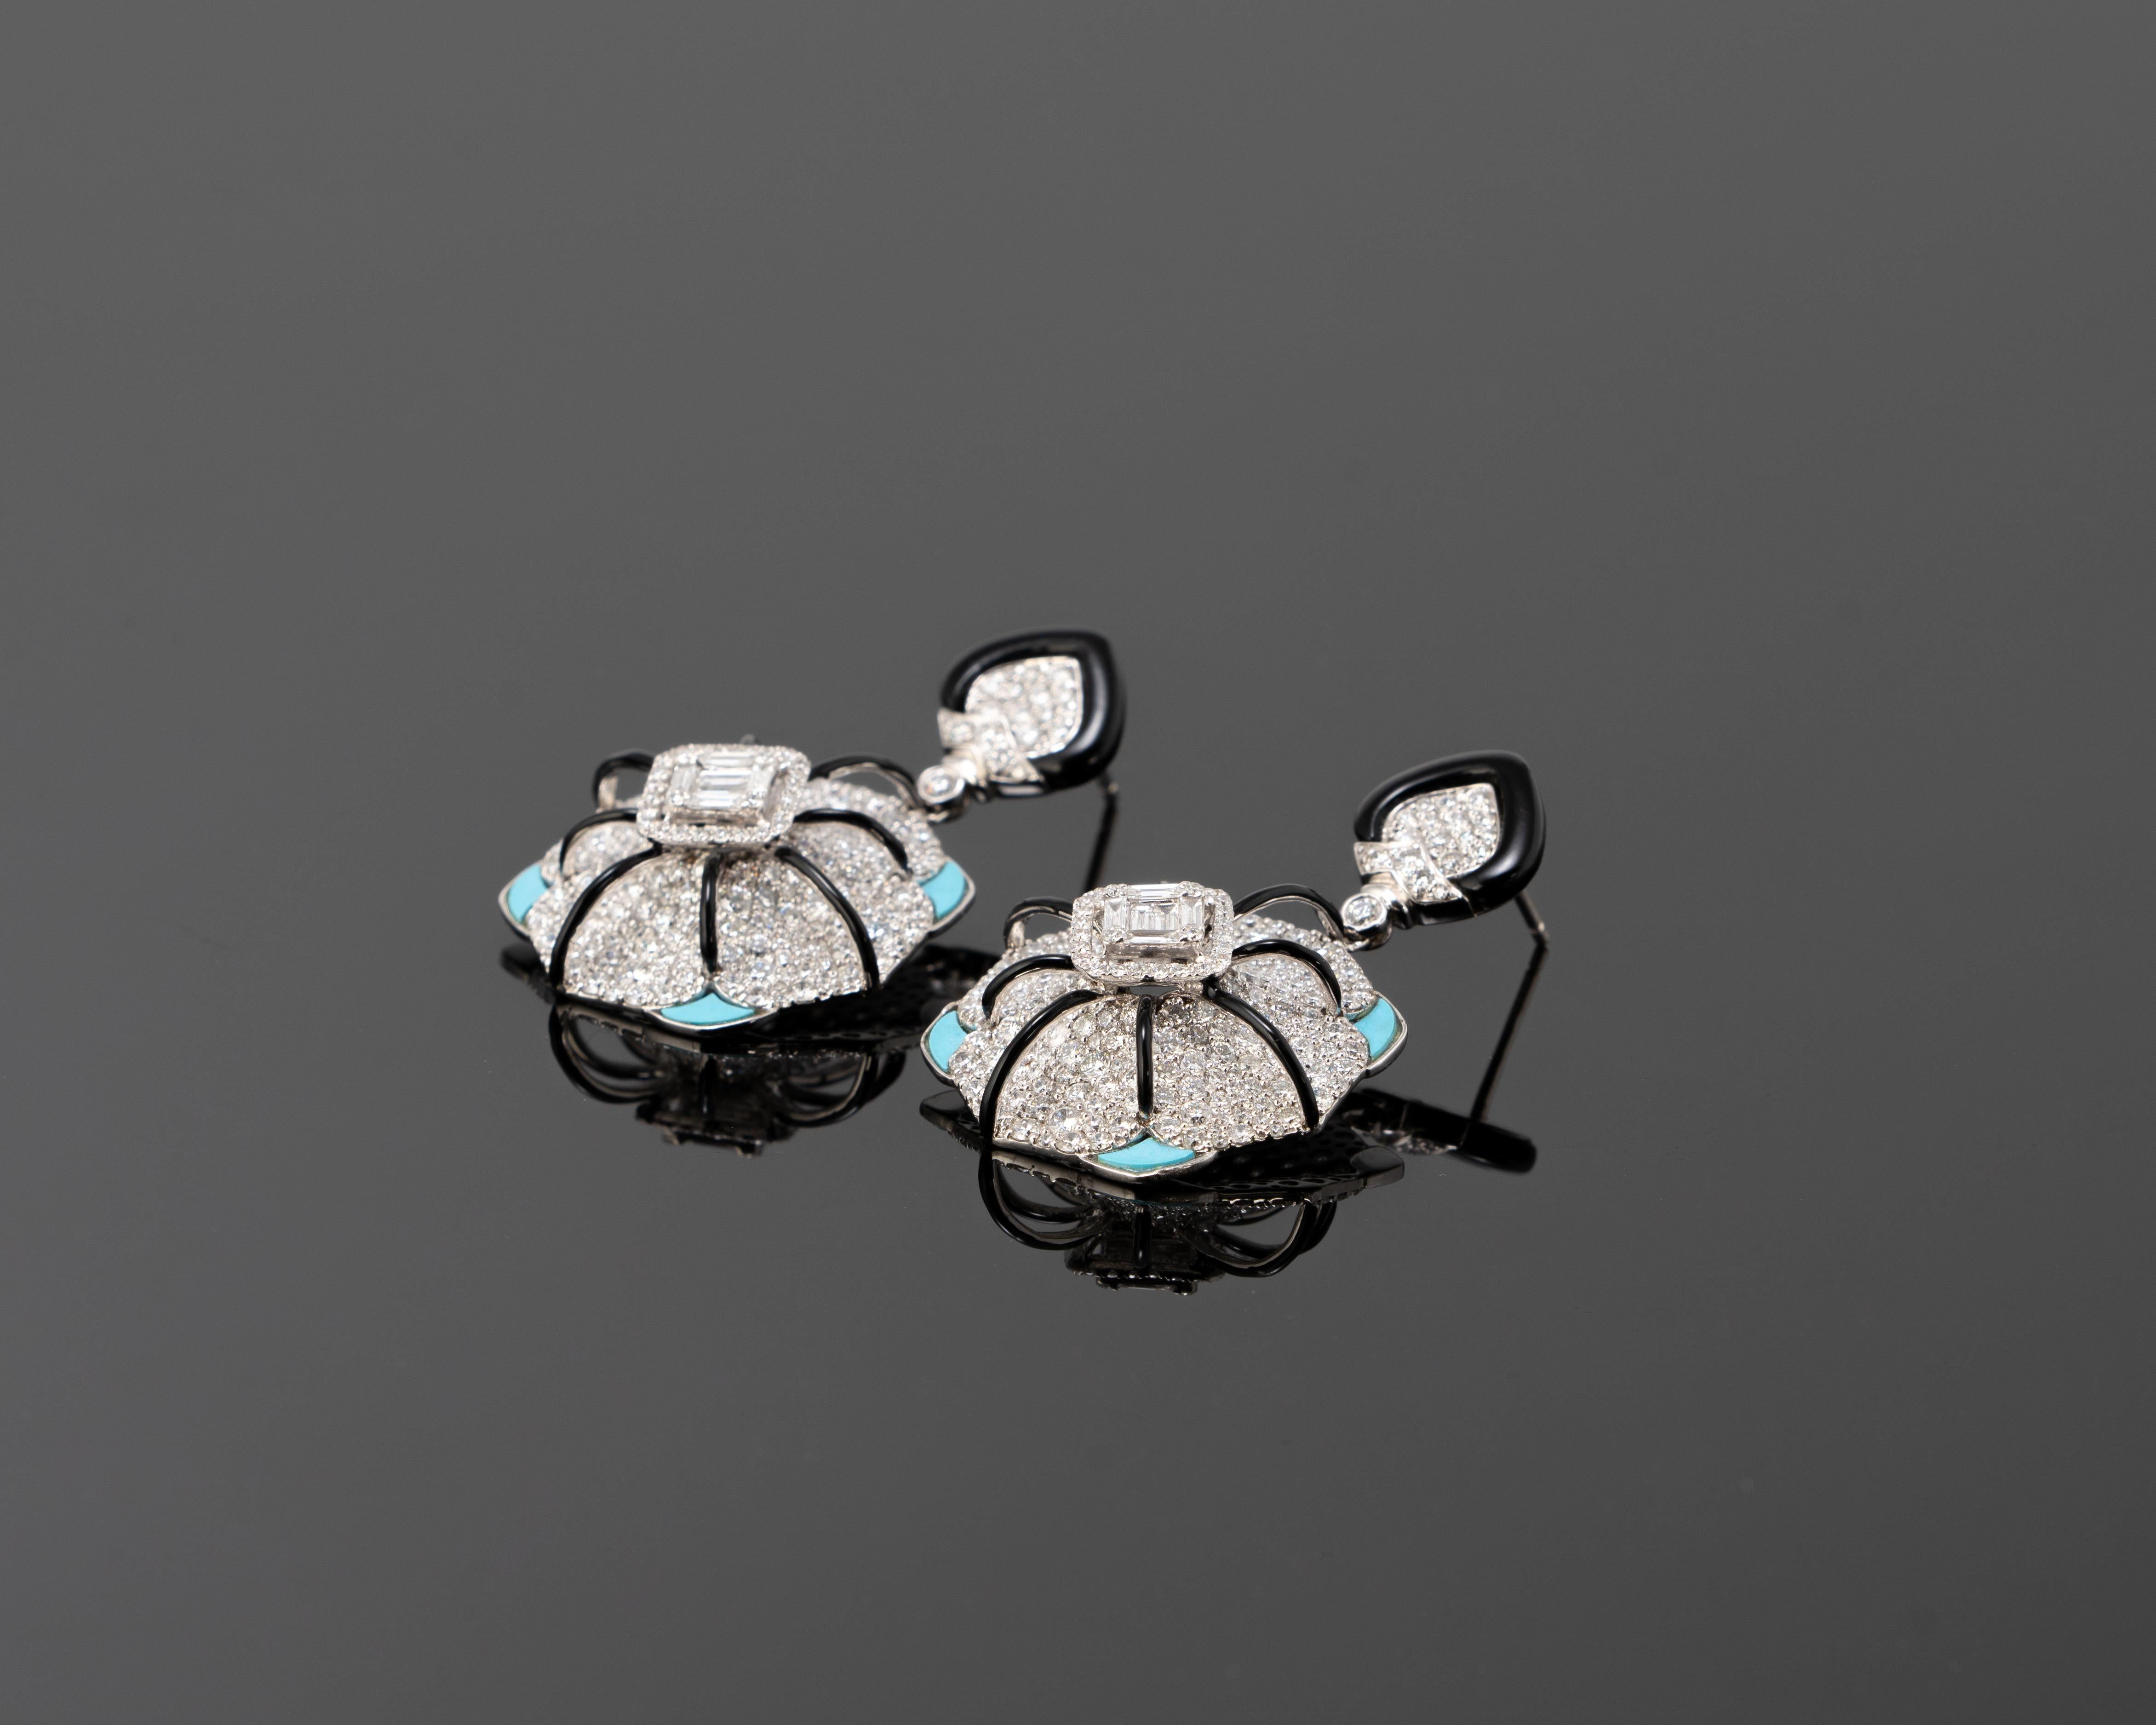 A stunning pair of Art-Deco earrings, studded with 7.5 carat VS quality White Diamonds, Turquoise and Black Onyx set in 18K White Gold. 